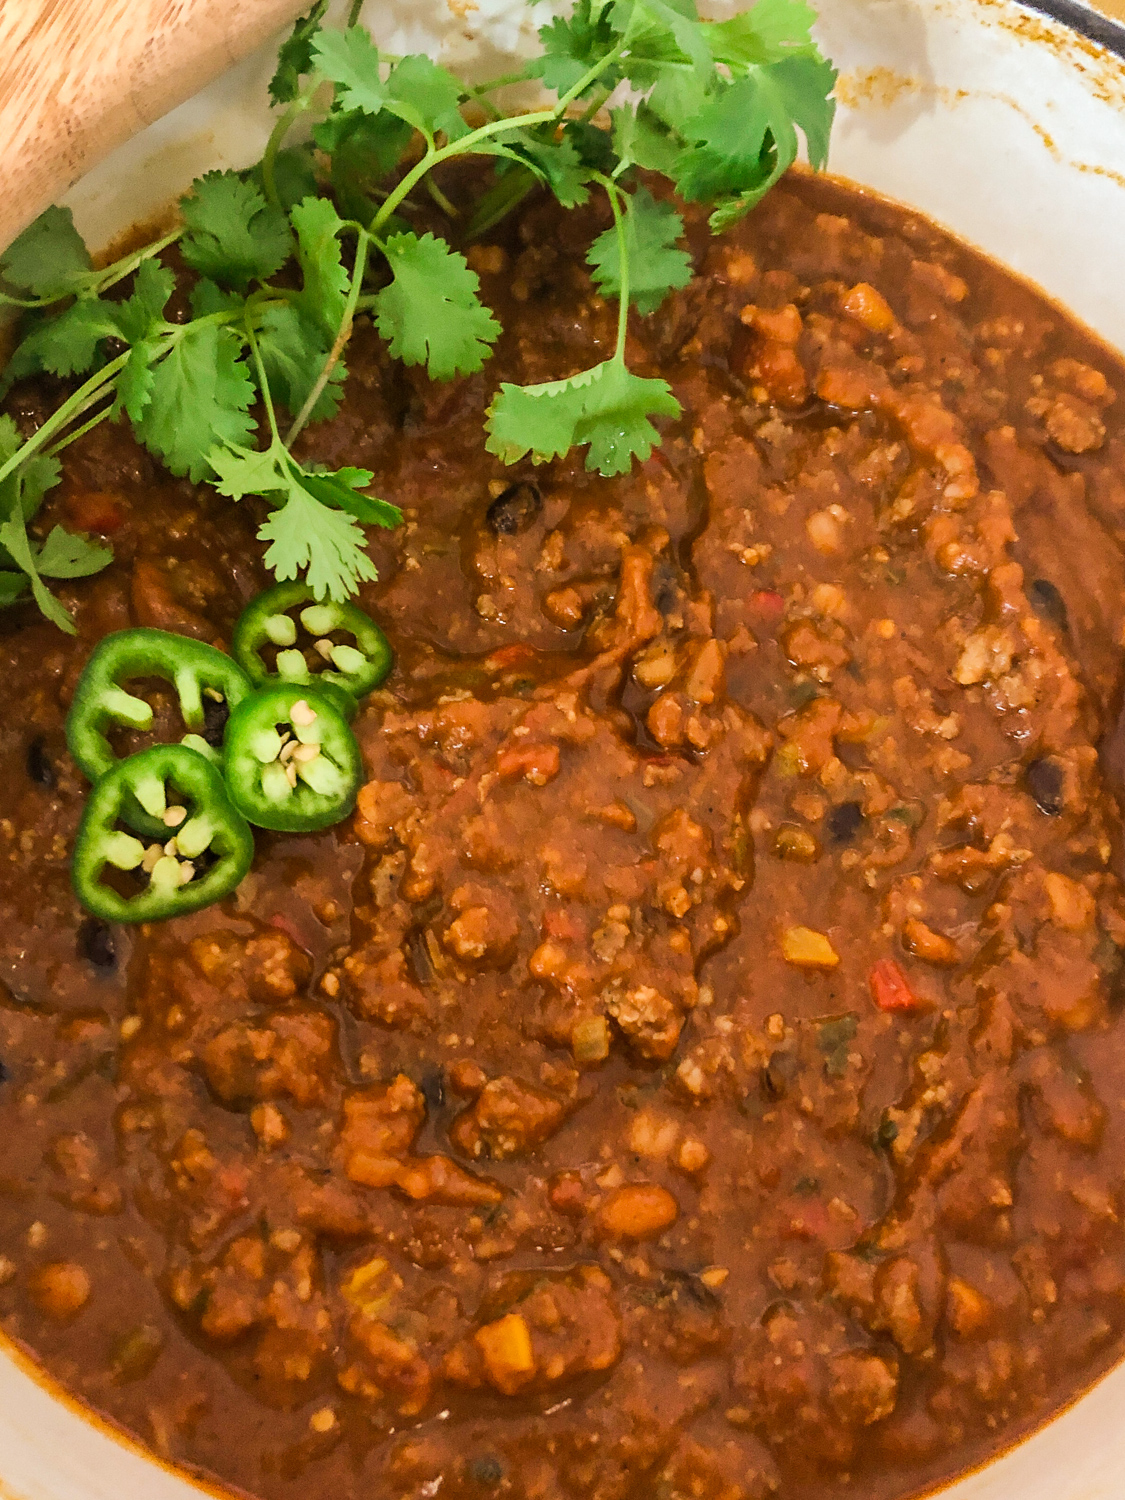 Close up view of the finished Pumpkin Chili in the Dutch oven garnished with fresh cilantro.